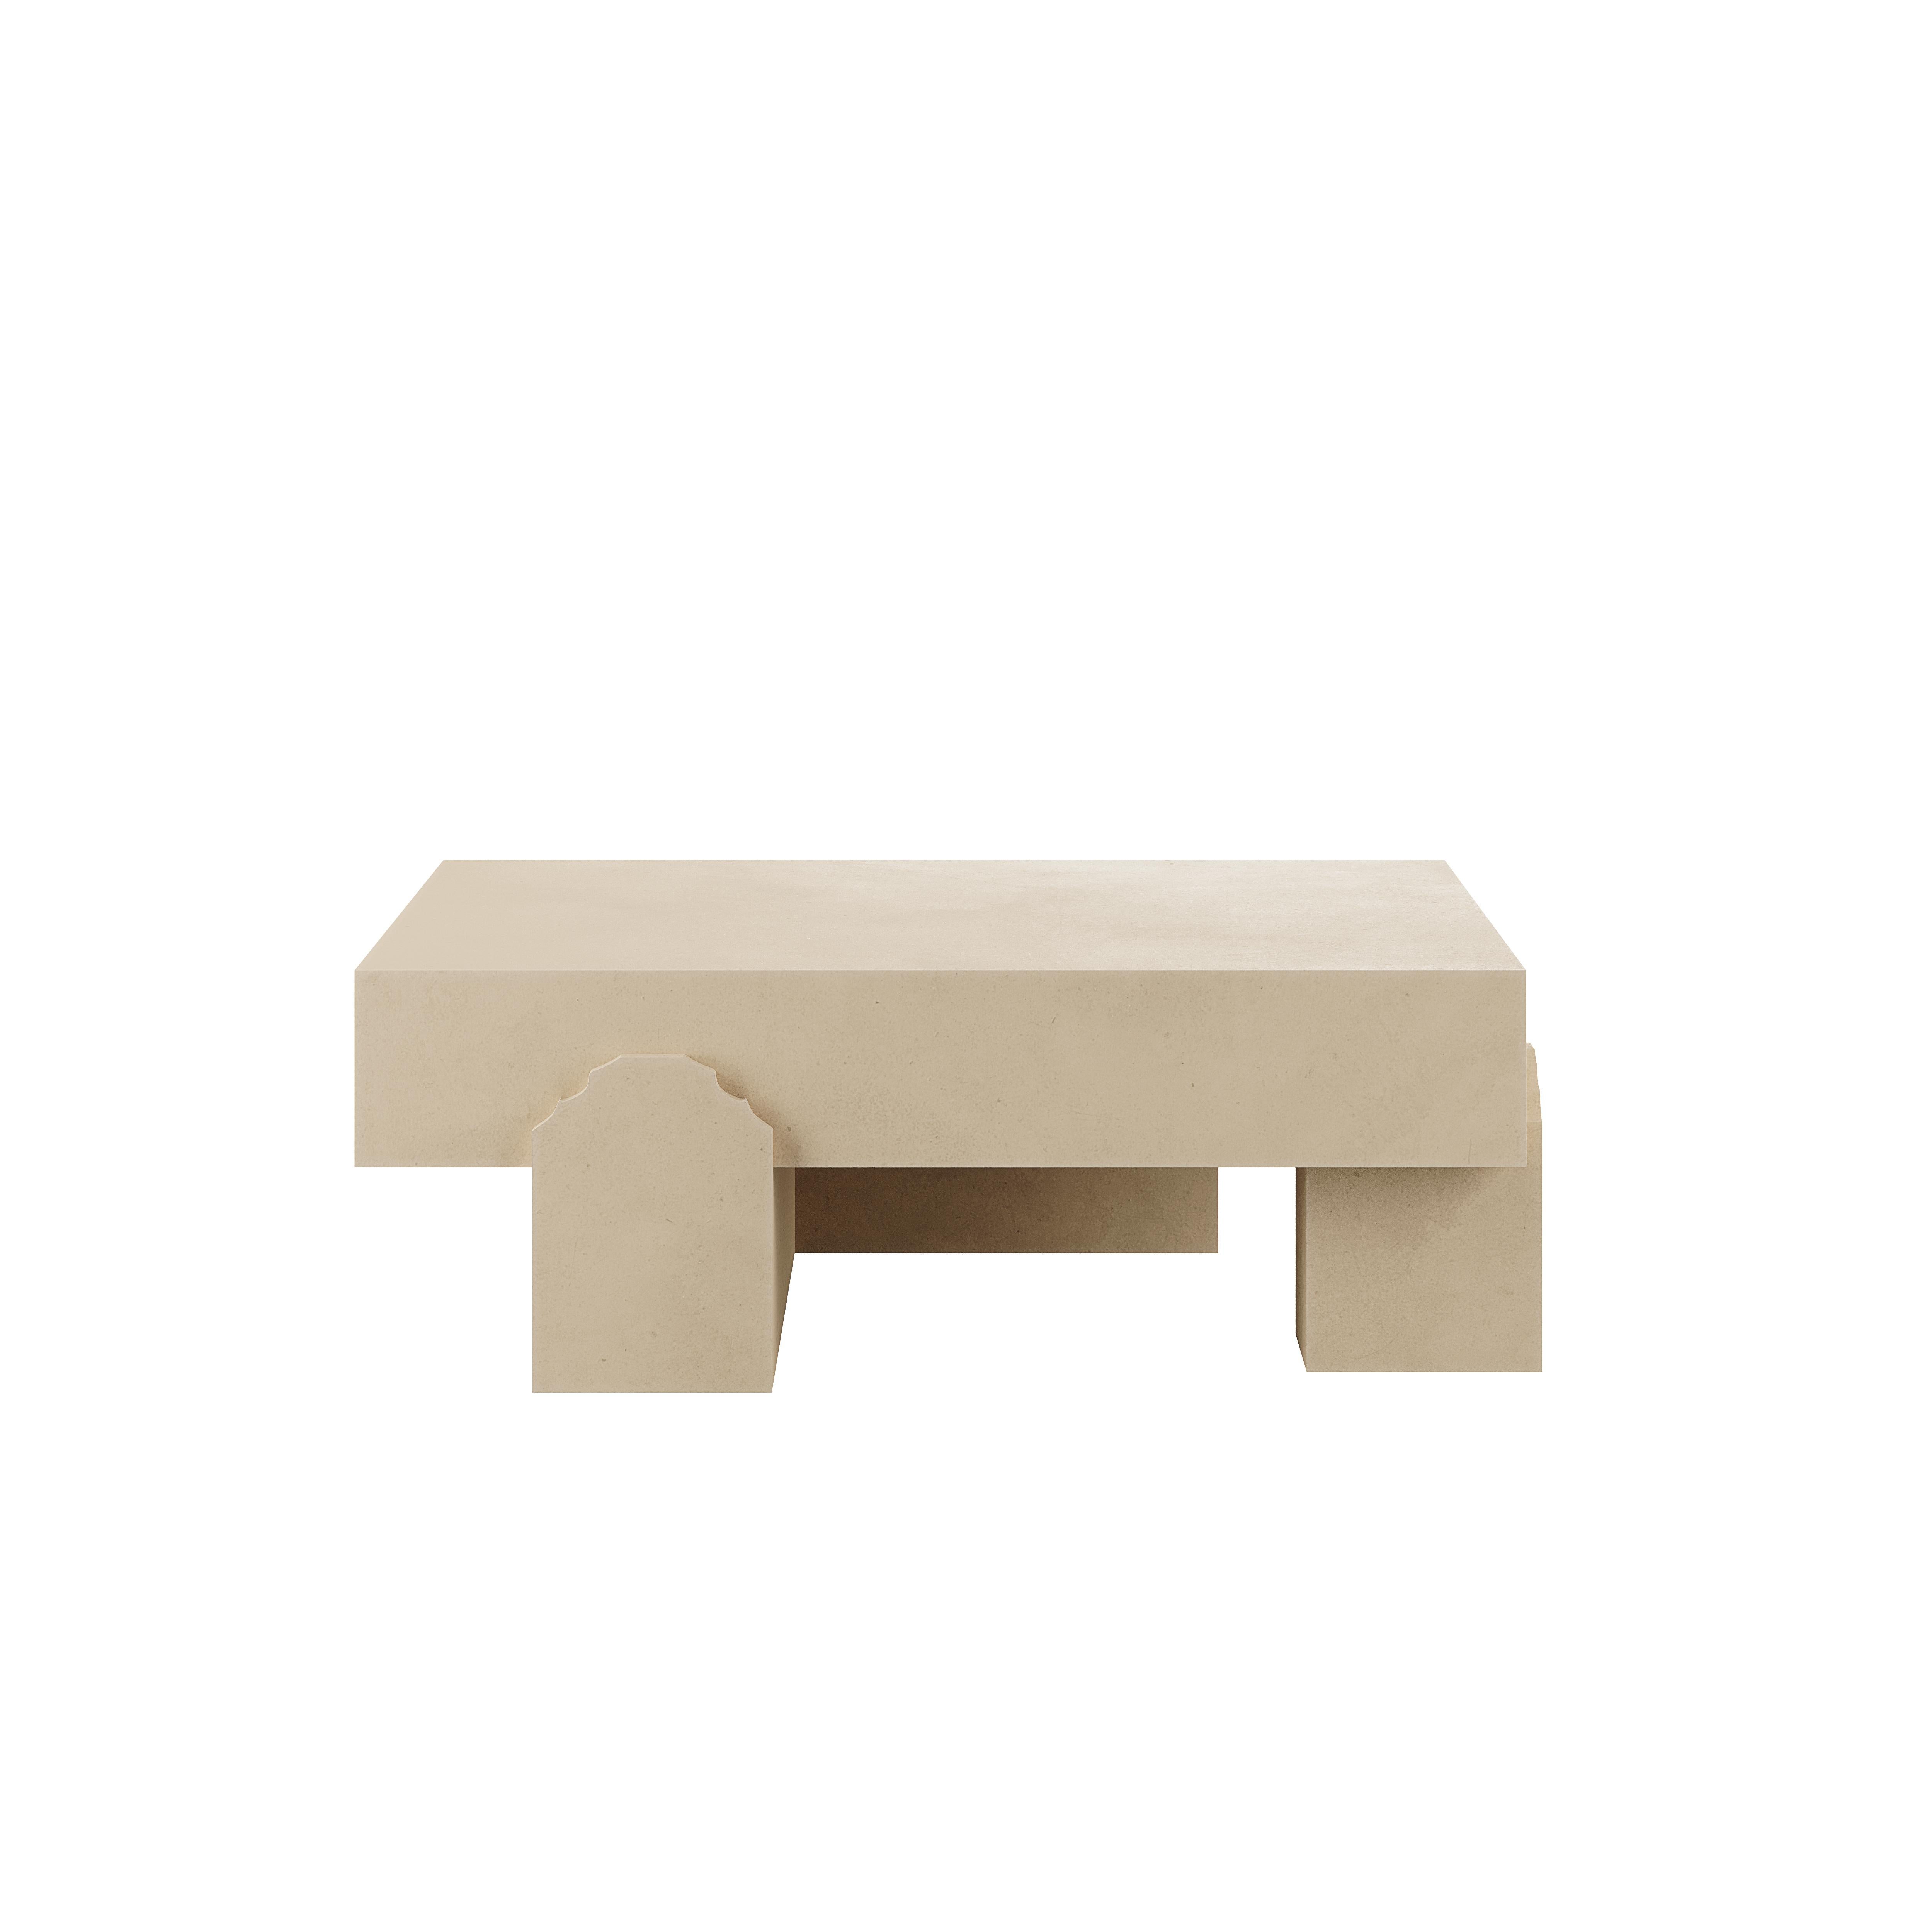 A brutalist center table, in a wood structure, finished in micro-cement.

A distinctive piece with a wooden structure and an exquisite micro-cement finish. This design provides a contemporary and raw look, making it the ideal solution for any living